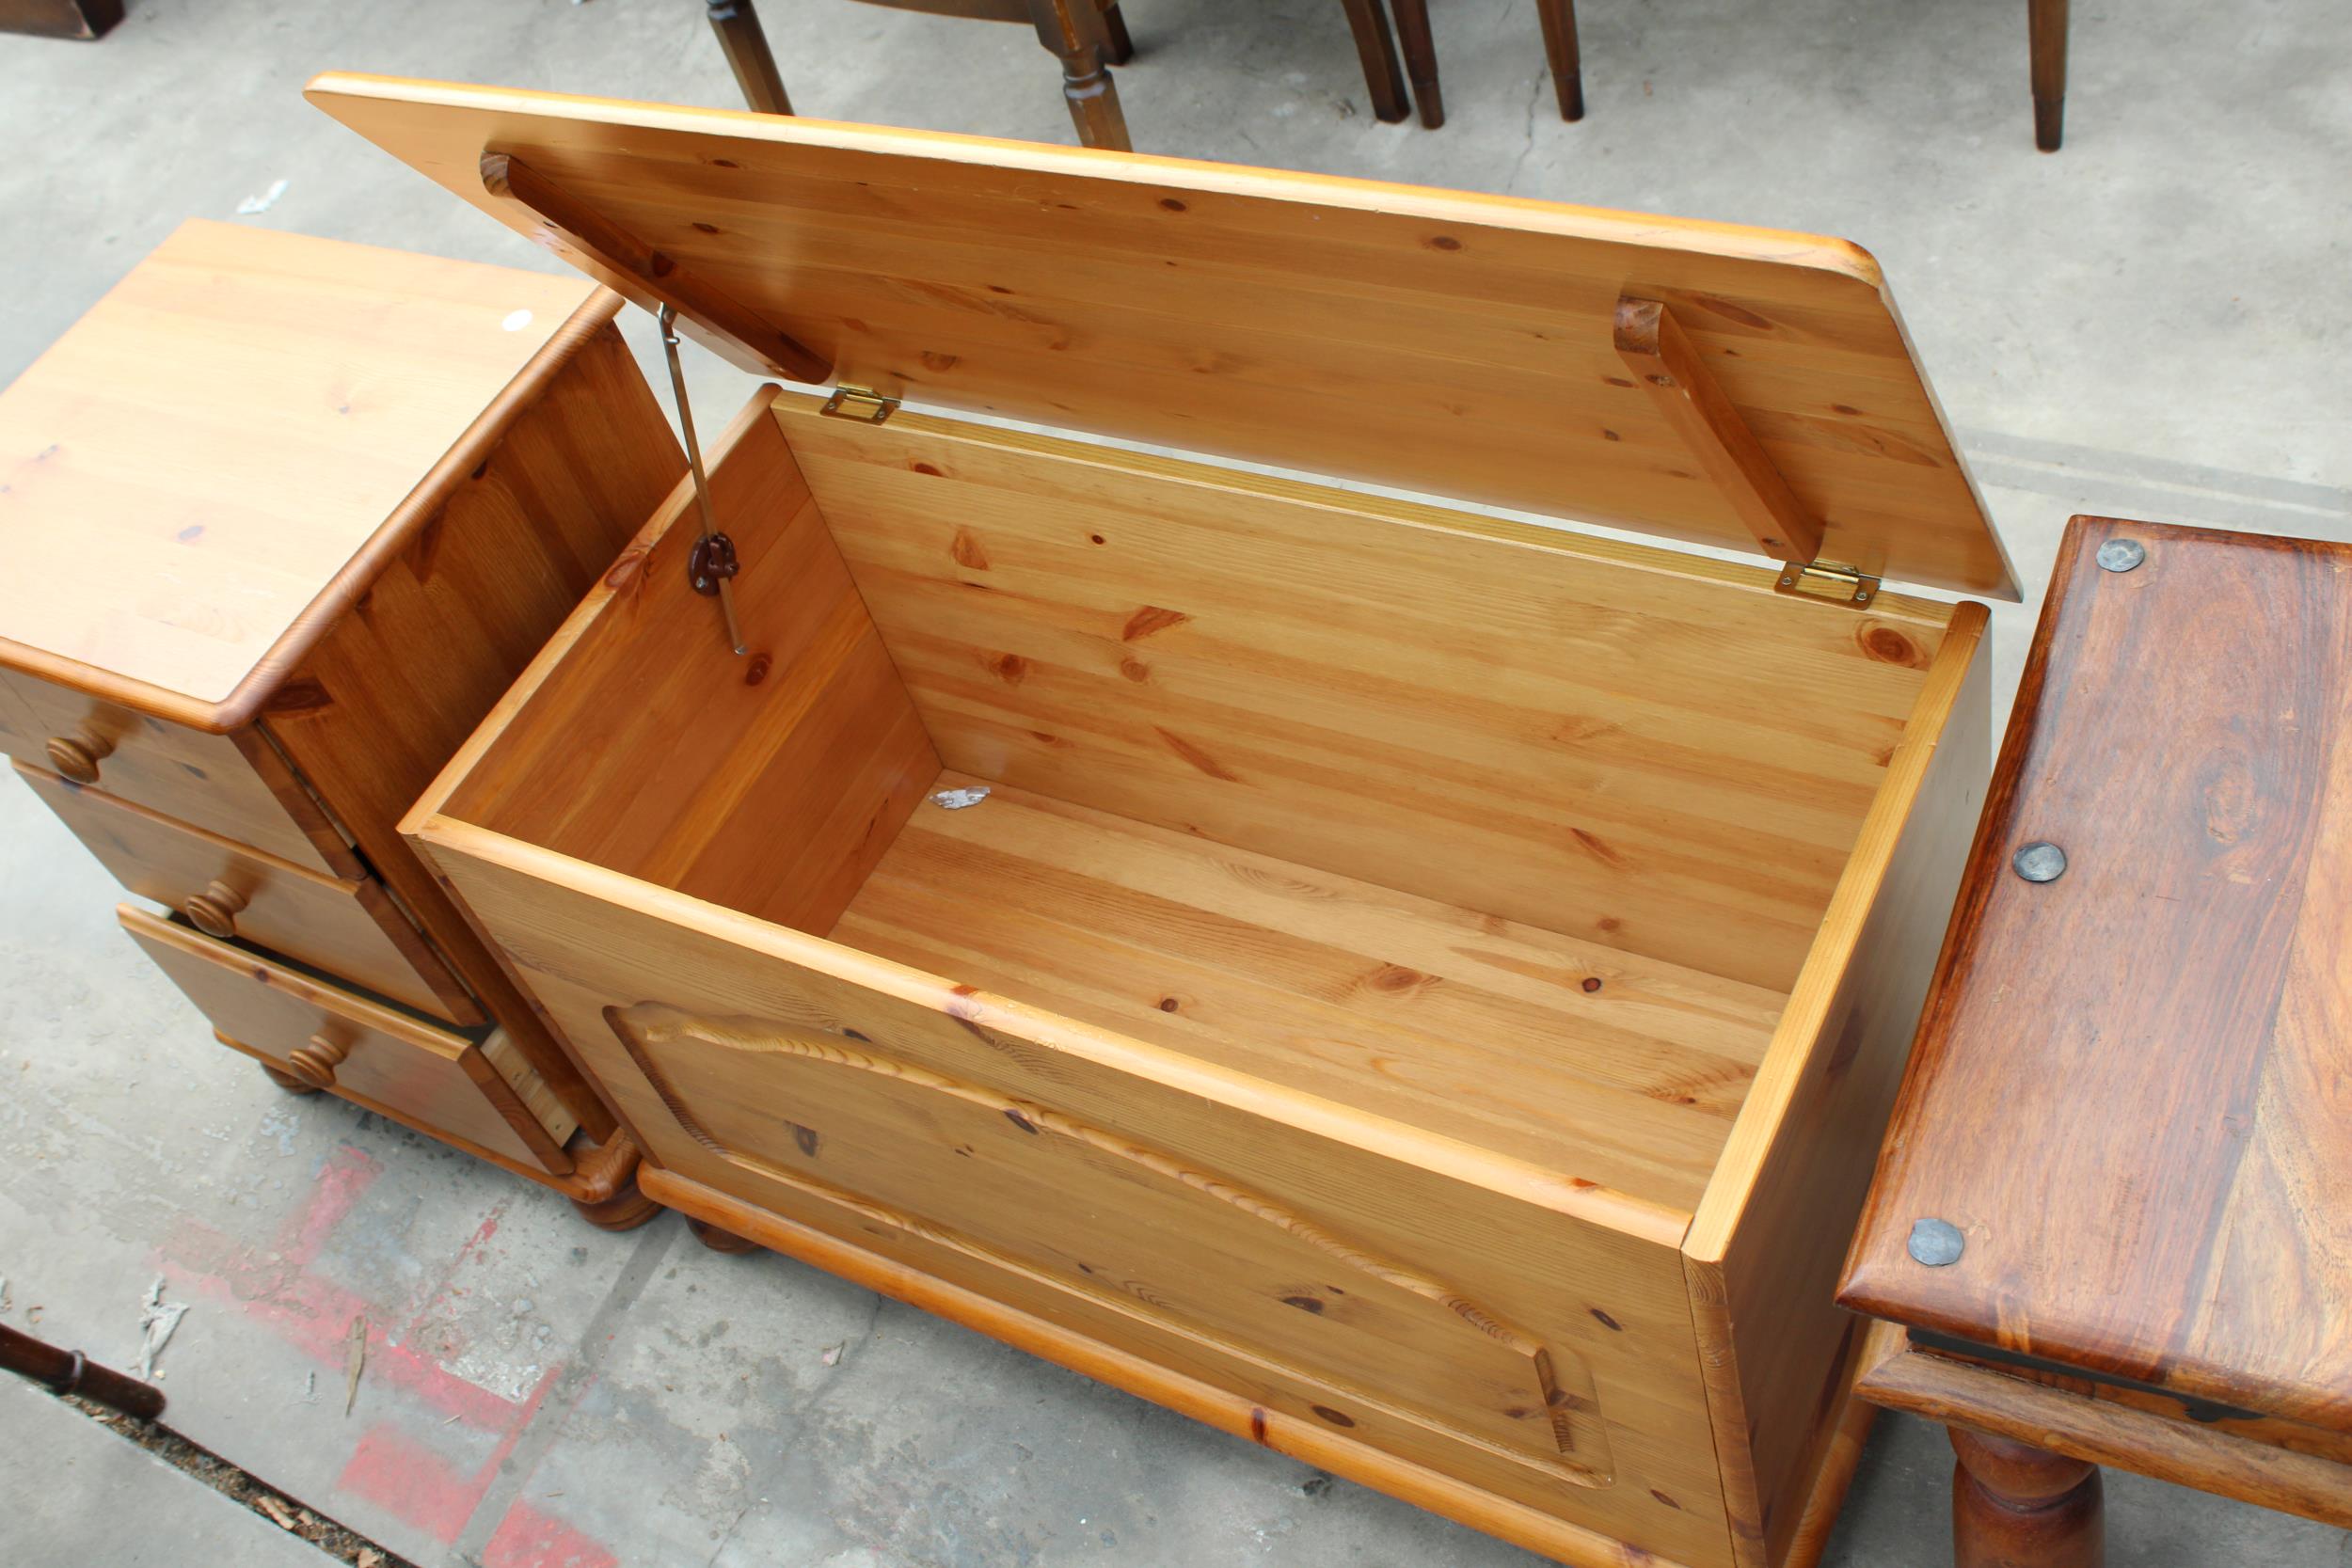 A HARDWOOD LAMP TABLE, MODERN PINE BLANKET CHEST AND THREE DRAWER BEDSIDE CHEST - Image 3 of 3